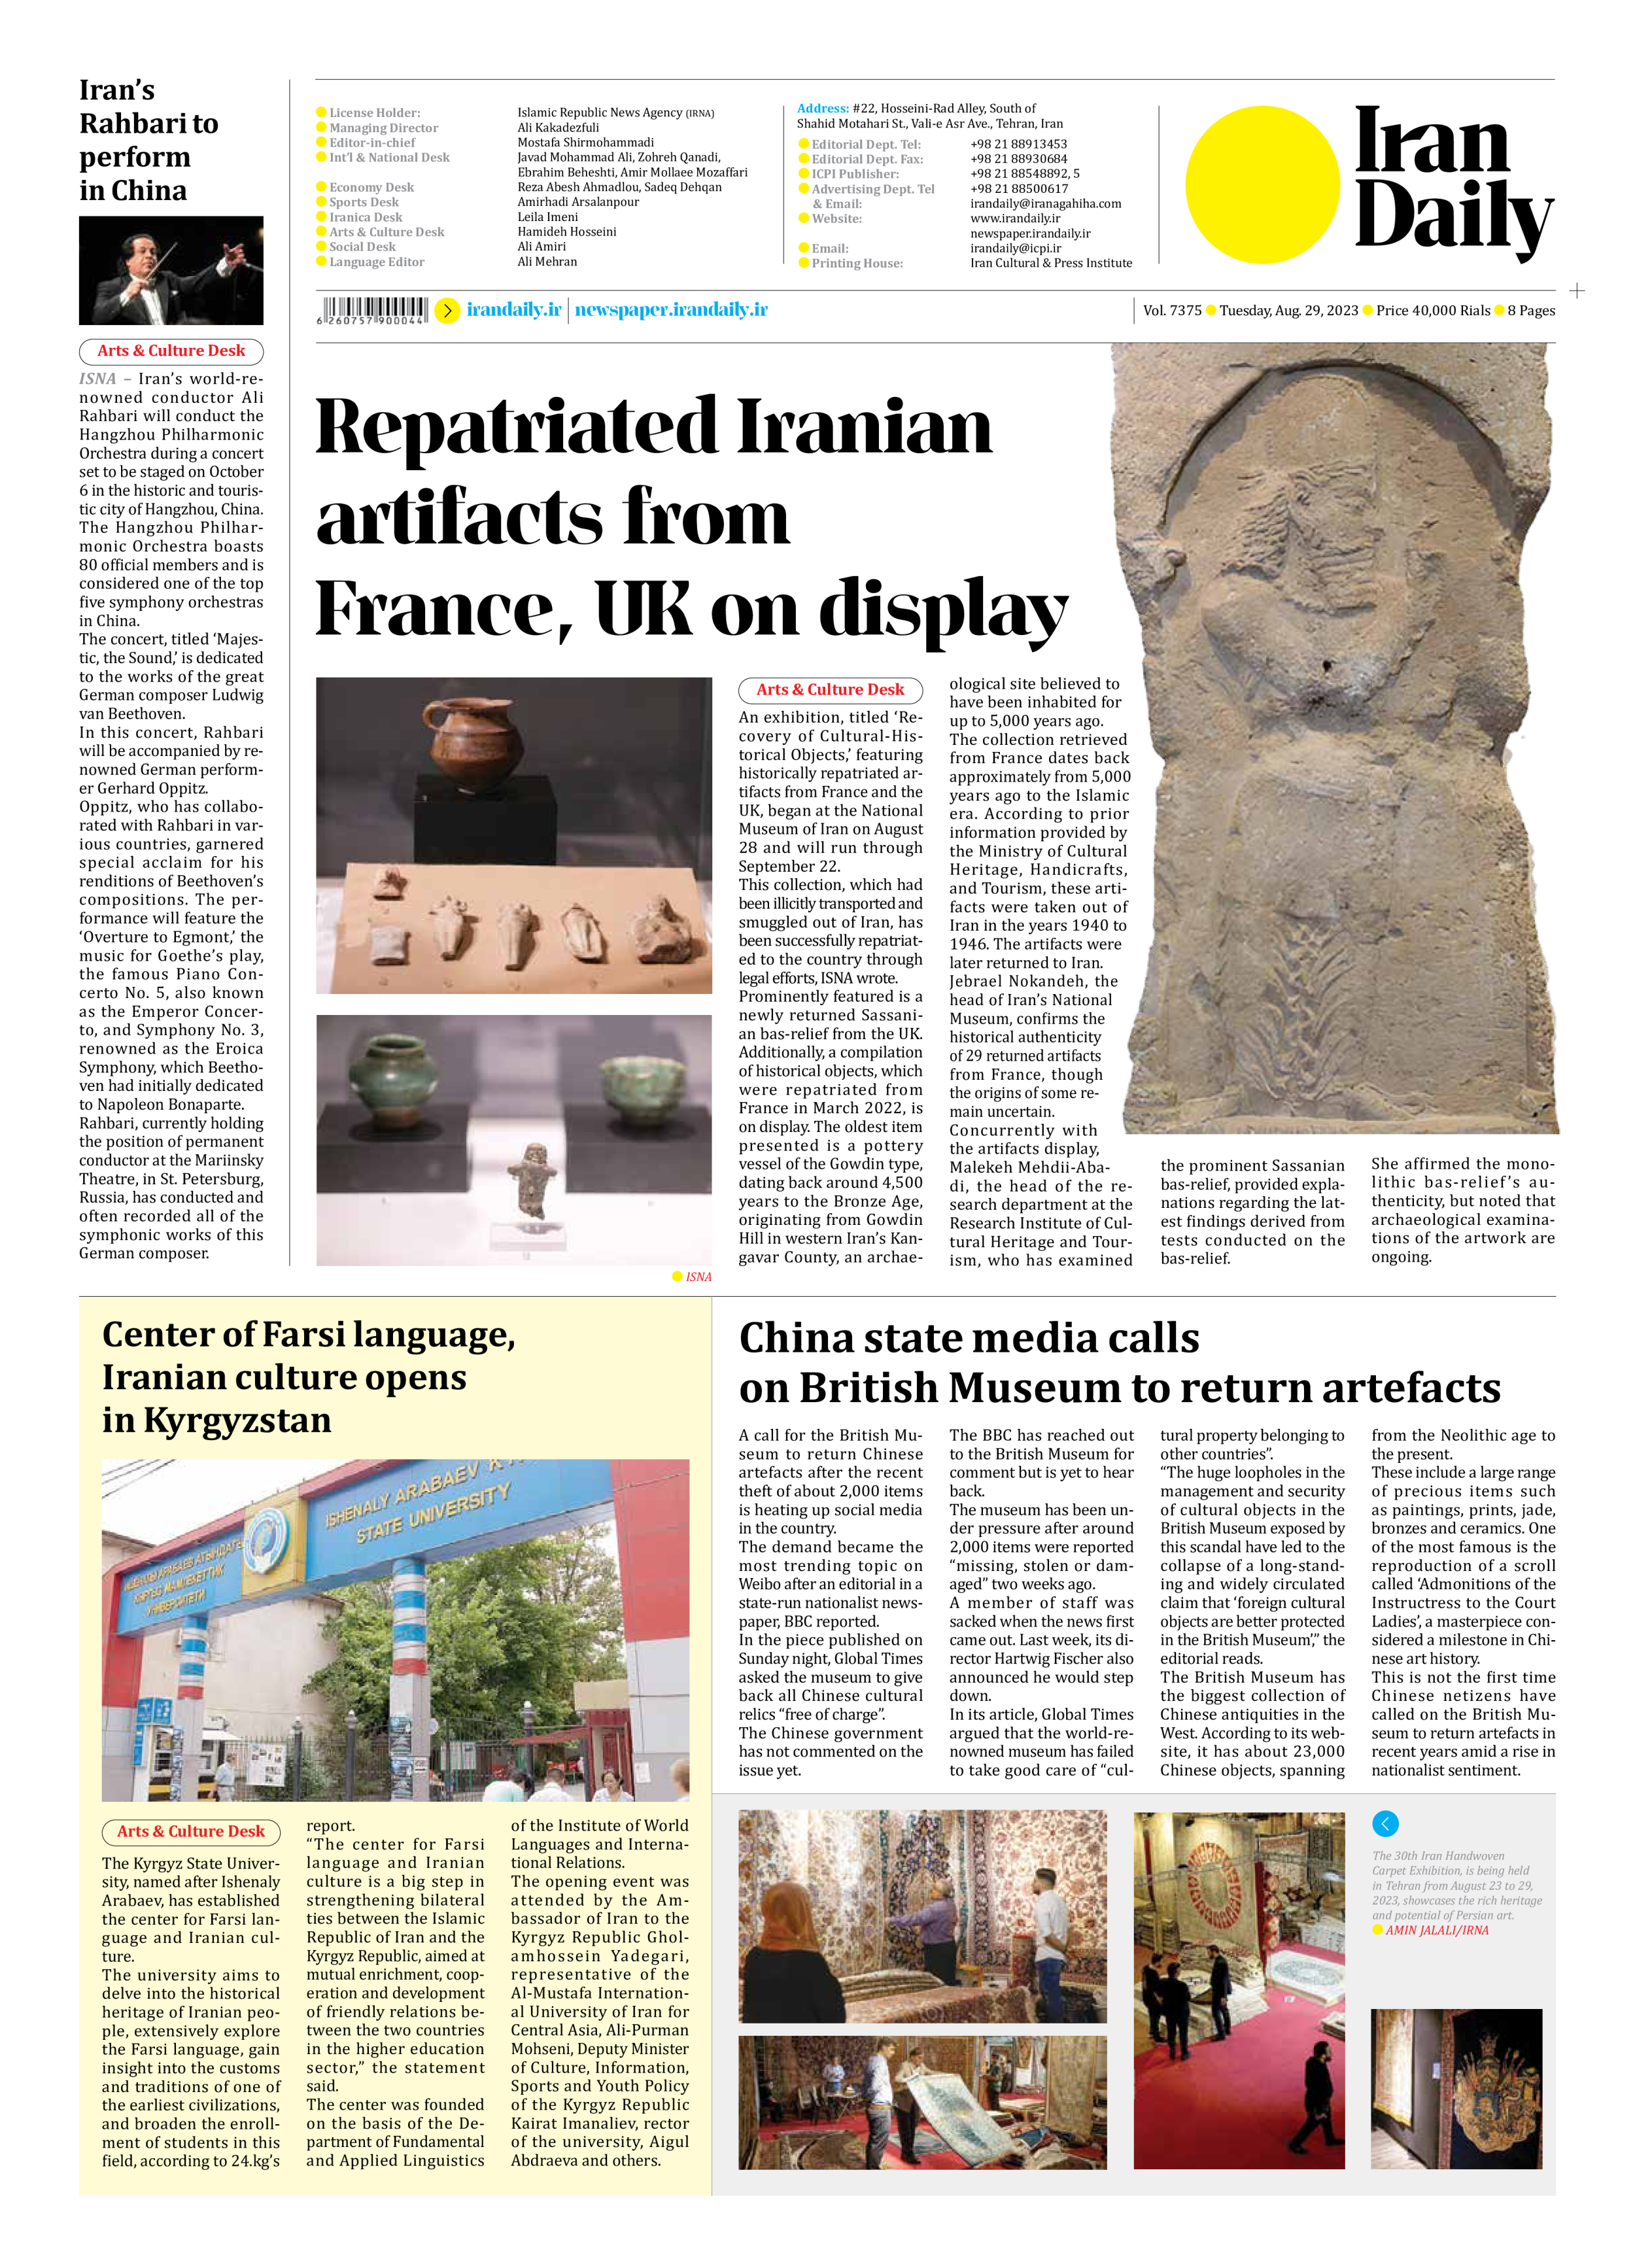 Iran Daily - Number Seven Thousand Three Hundred and Seventy Five - 29 August 2023 - Page 8